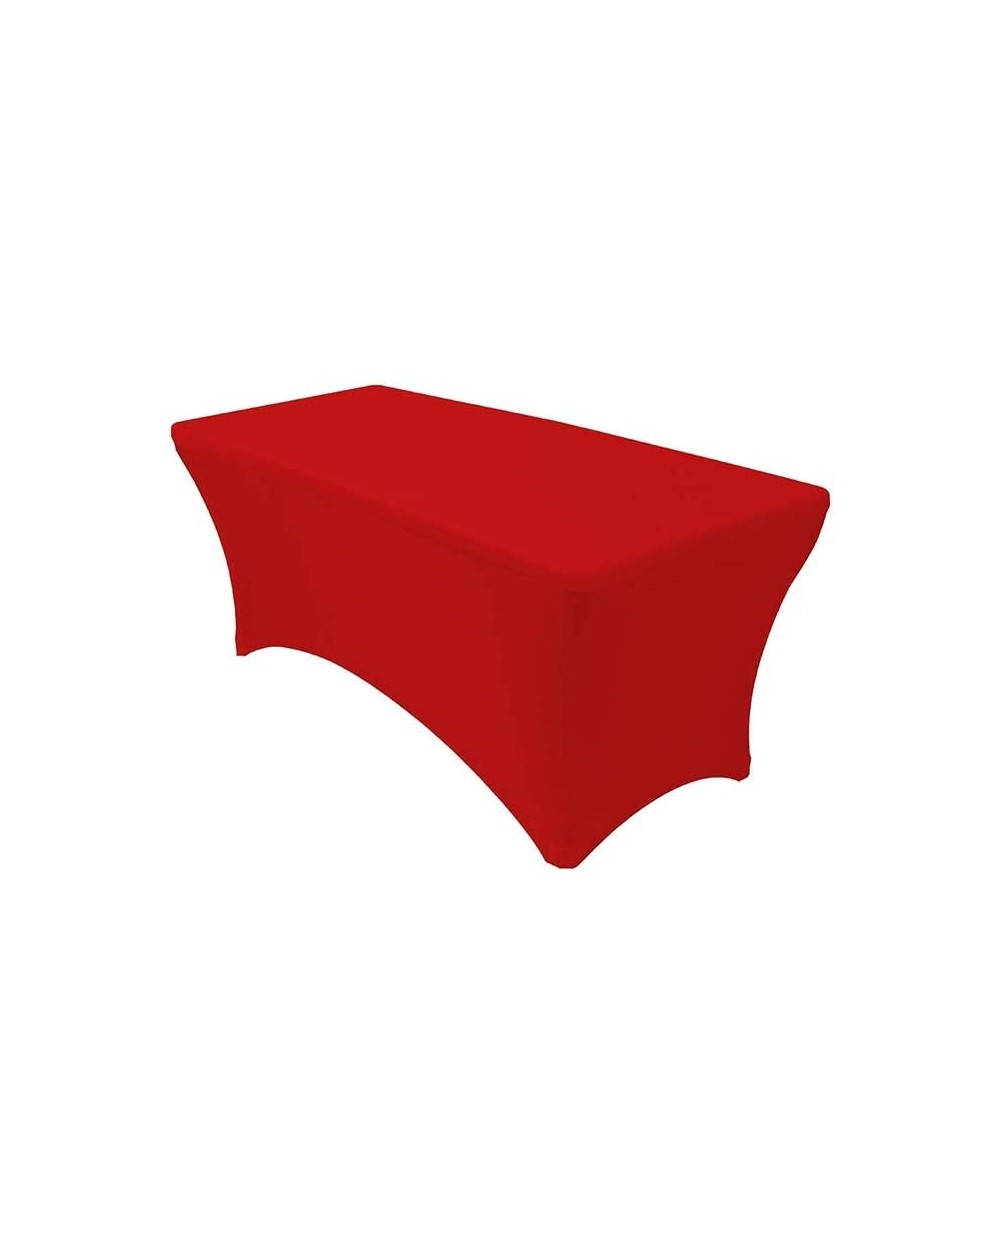 Tablecovers 8 ft Rectangular Fitted Spandex Tablecloths Patio Table Cover Stretchable Tablecloth - Red - Red - C21869W3QLL $1...